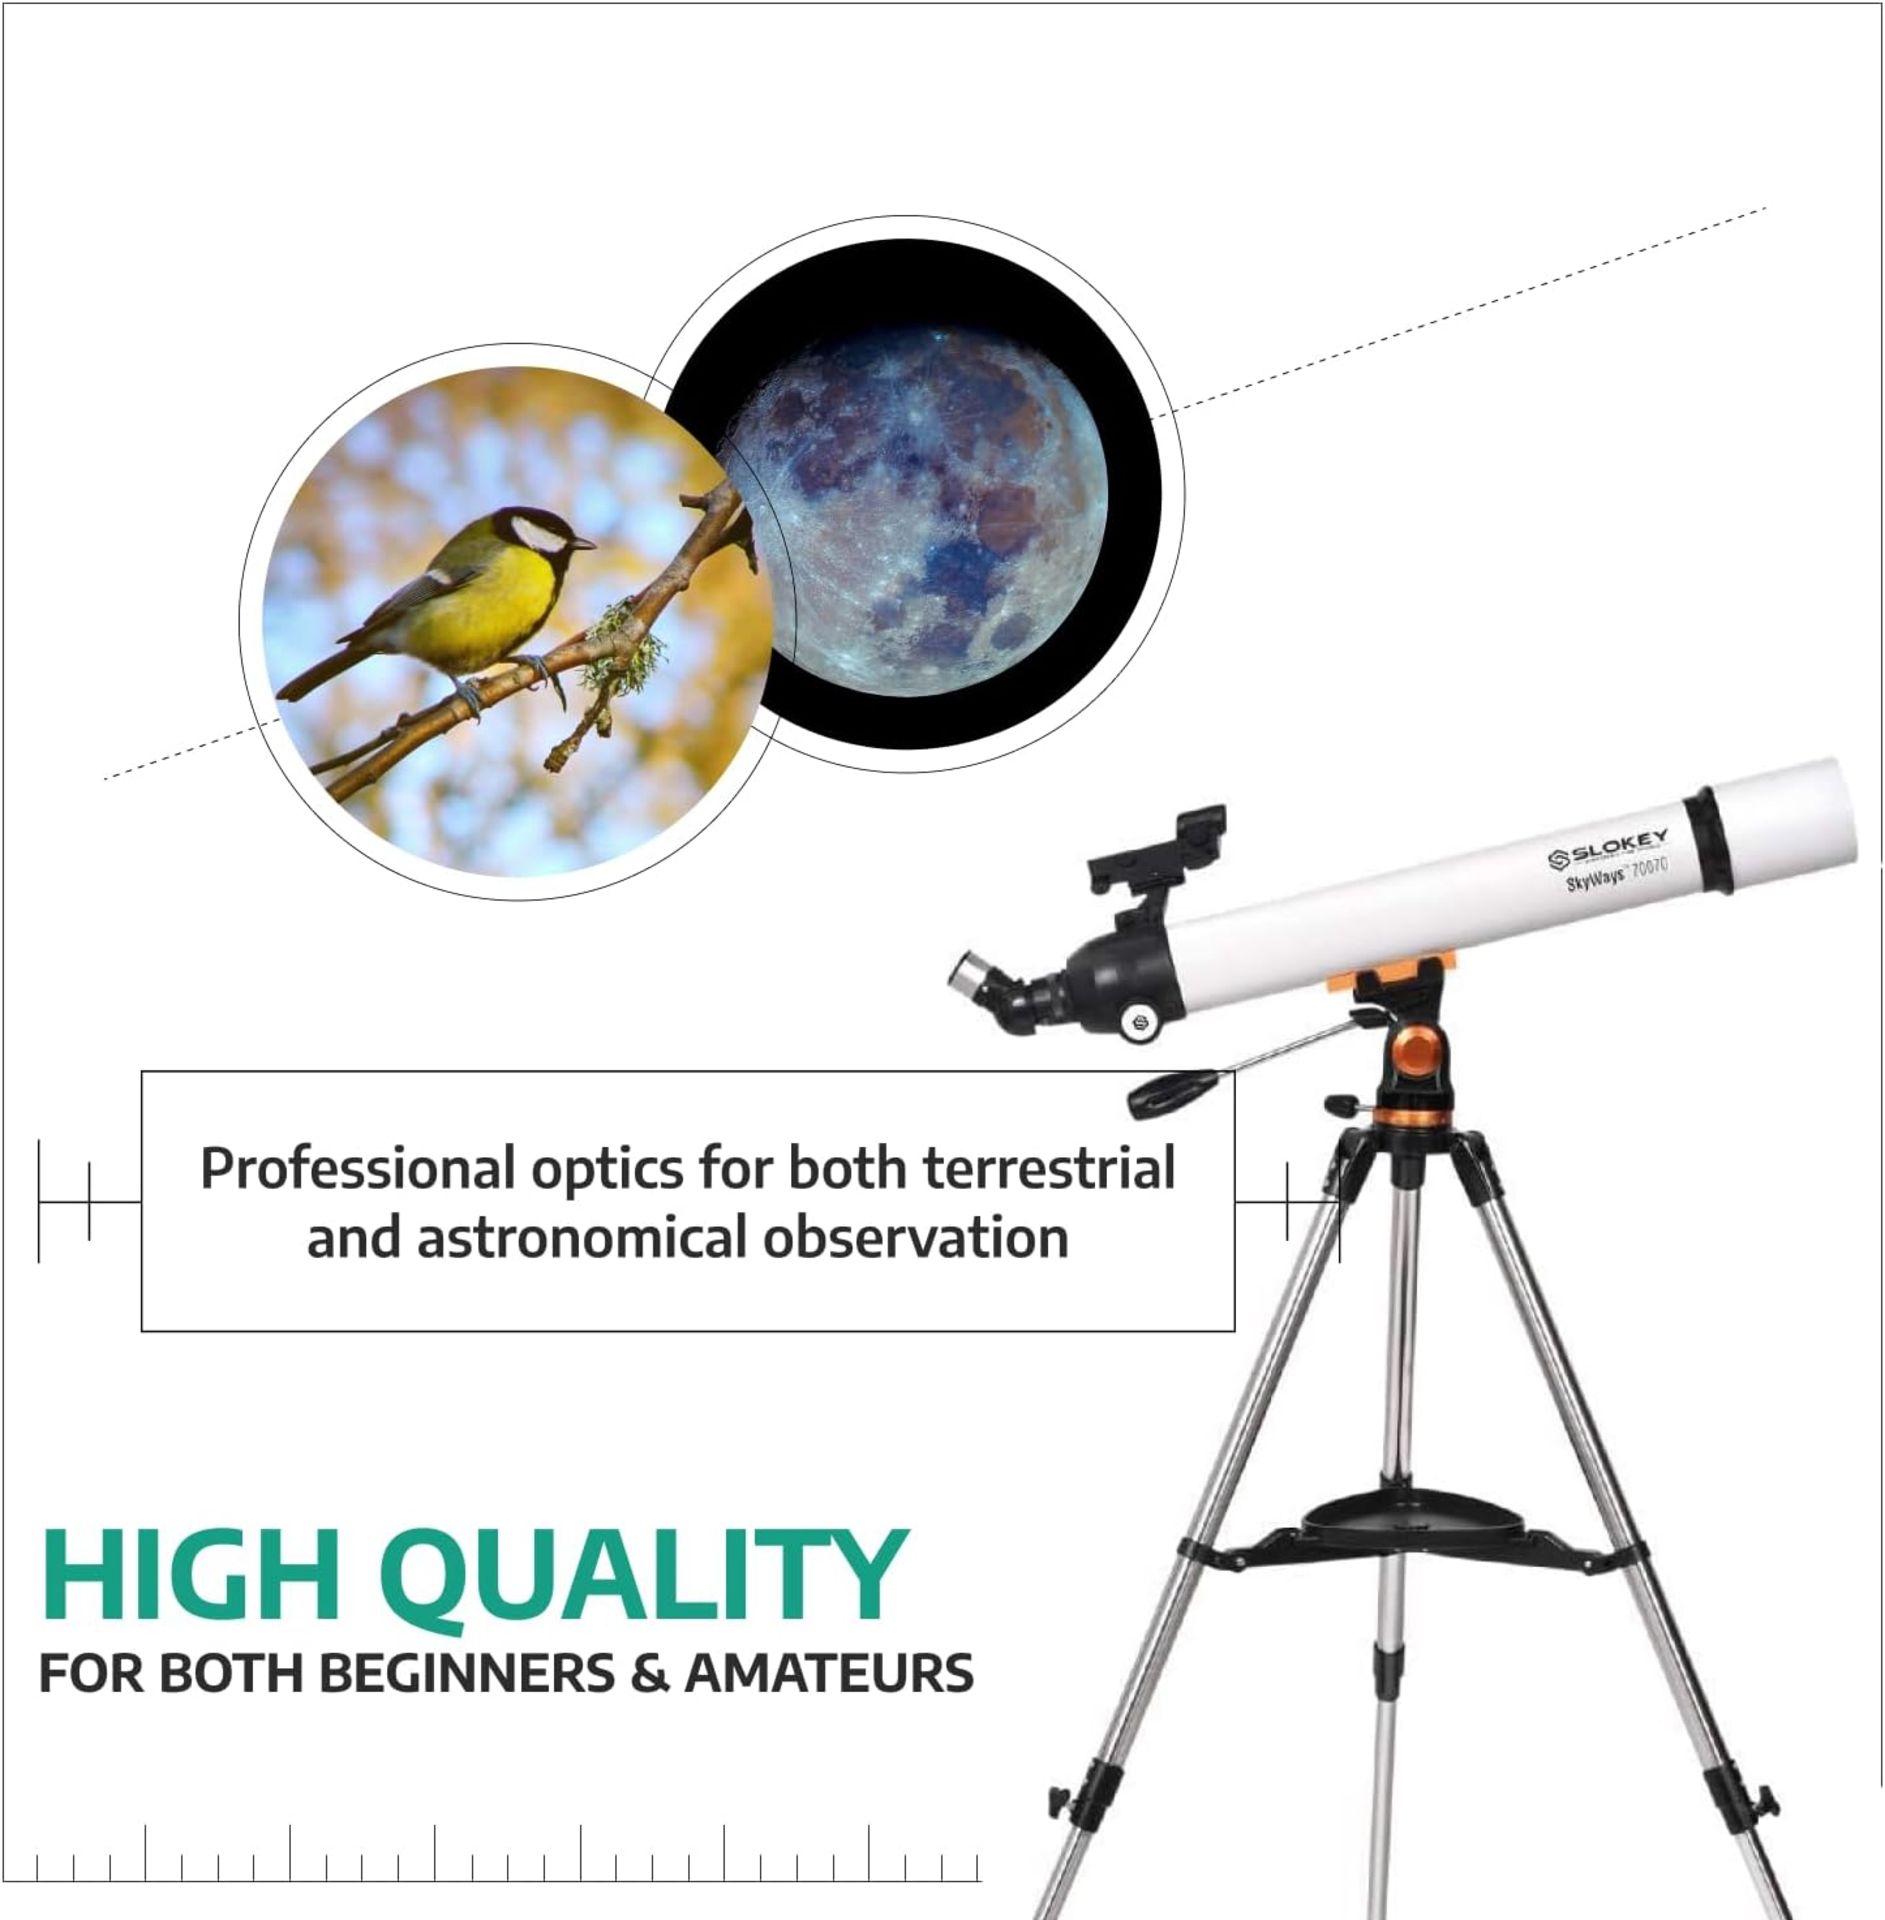 1X SLOKEY 70070 SKYWAYS TELESCOPE FOR ASTRONOMY WITH ACCESSORIES (NEW) - AMAZON RRP £159.99 - Image 4 of 11